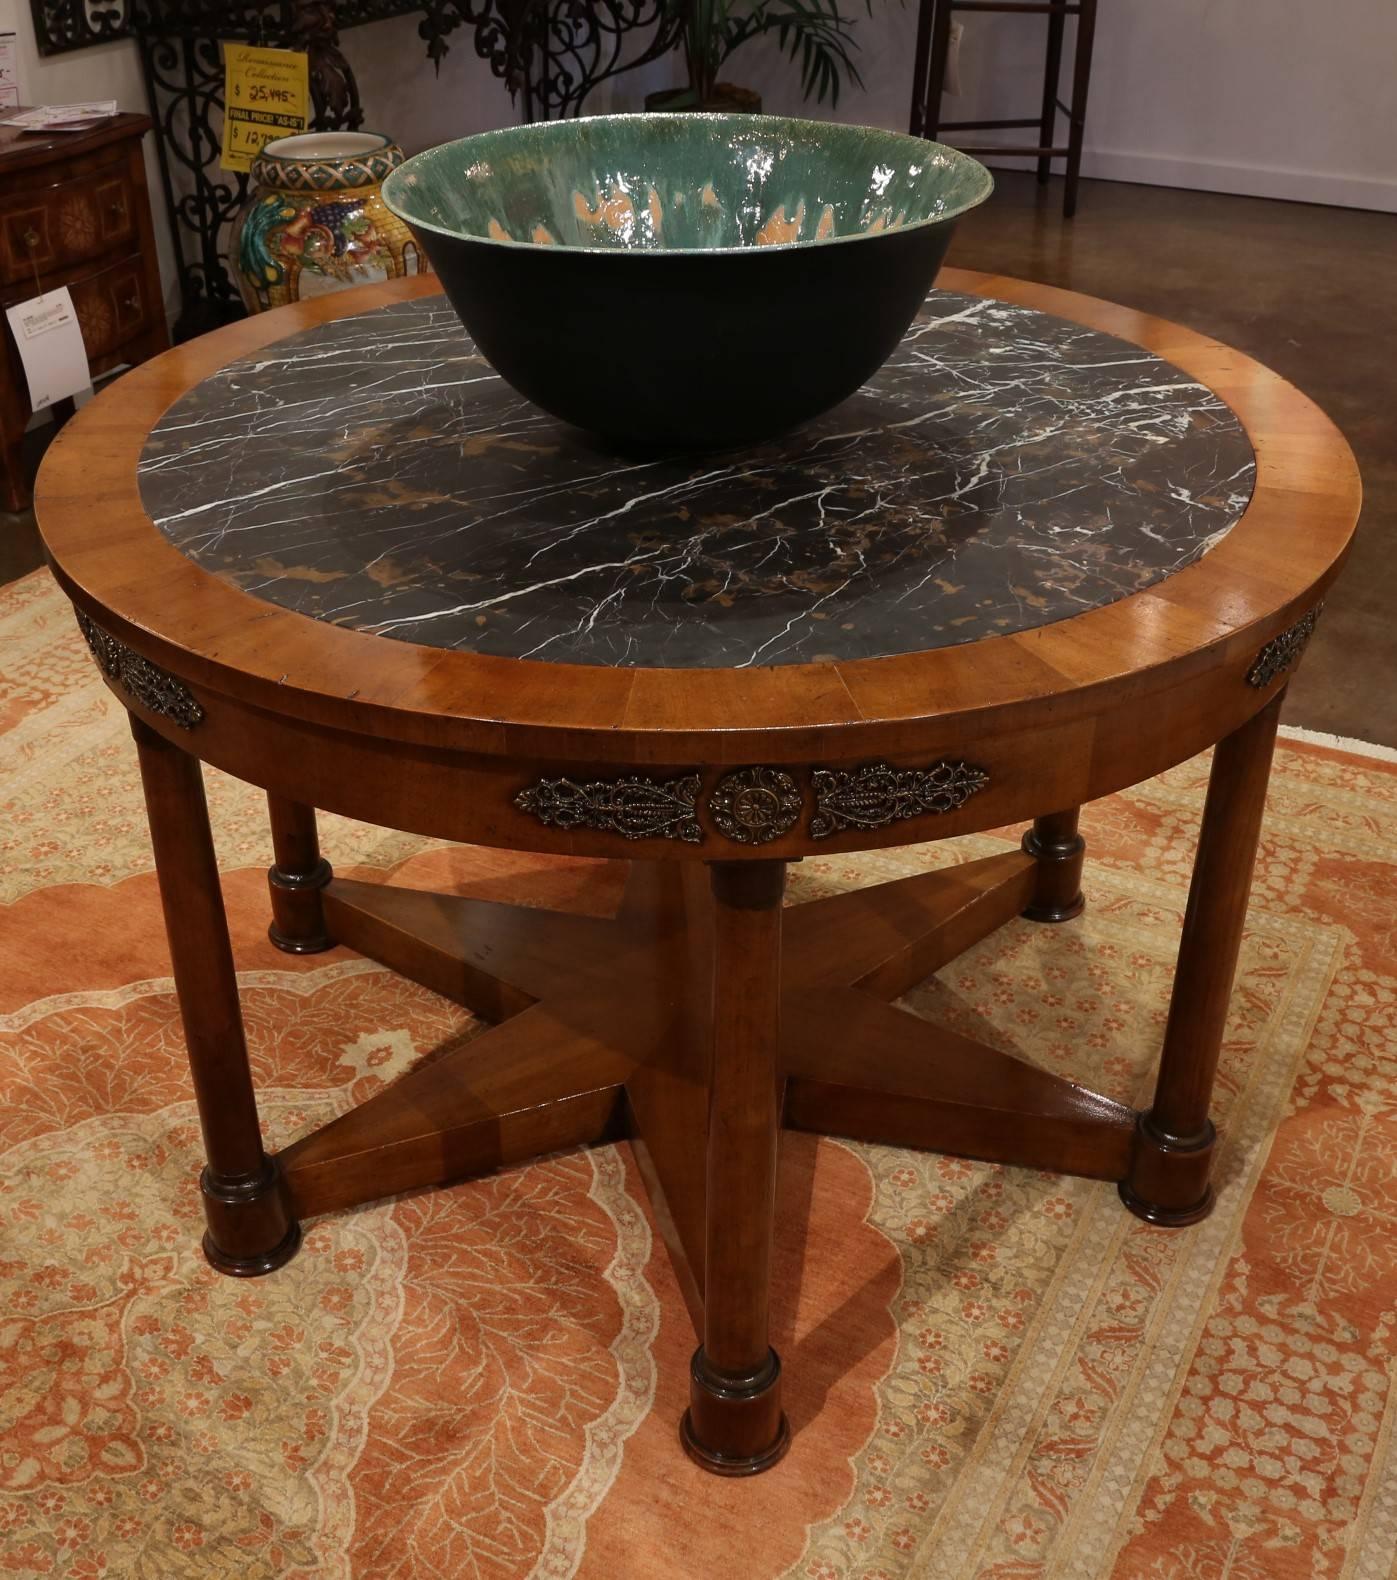 One-of-a-Kind walnut center table based on 19th Century original design with honed brown/black marble inset, antiqued brass accents and six legs featuring a starburst base.